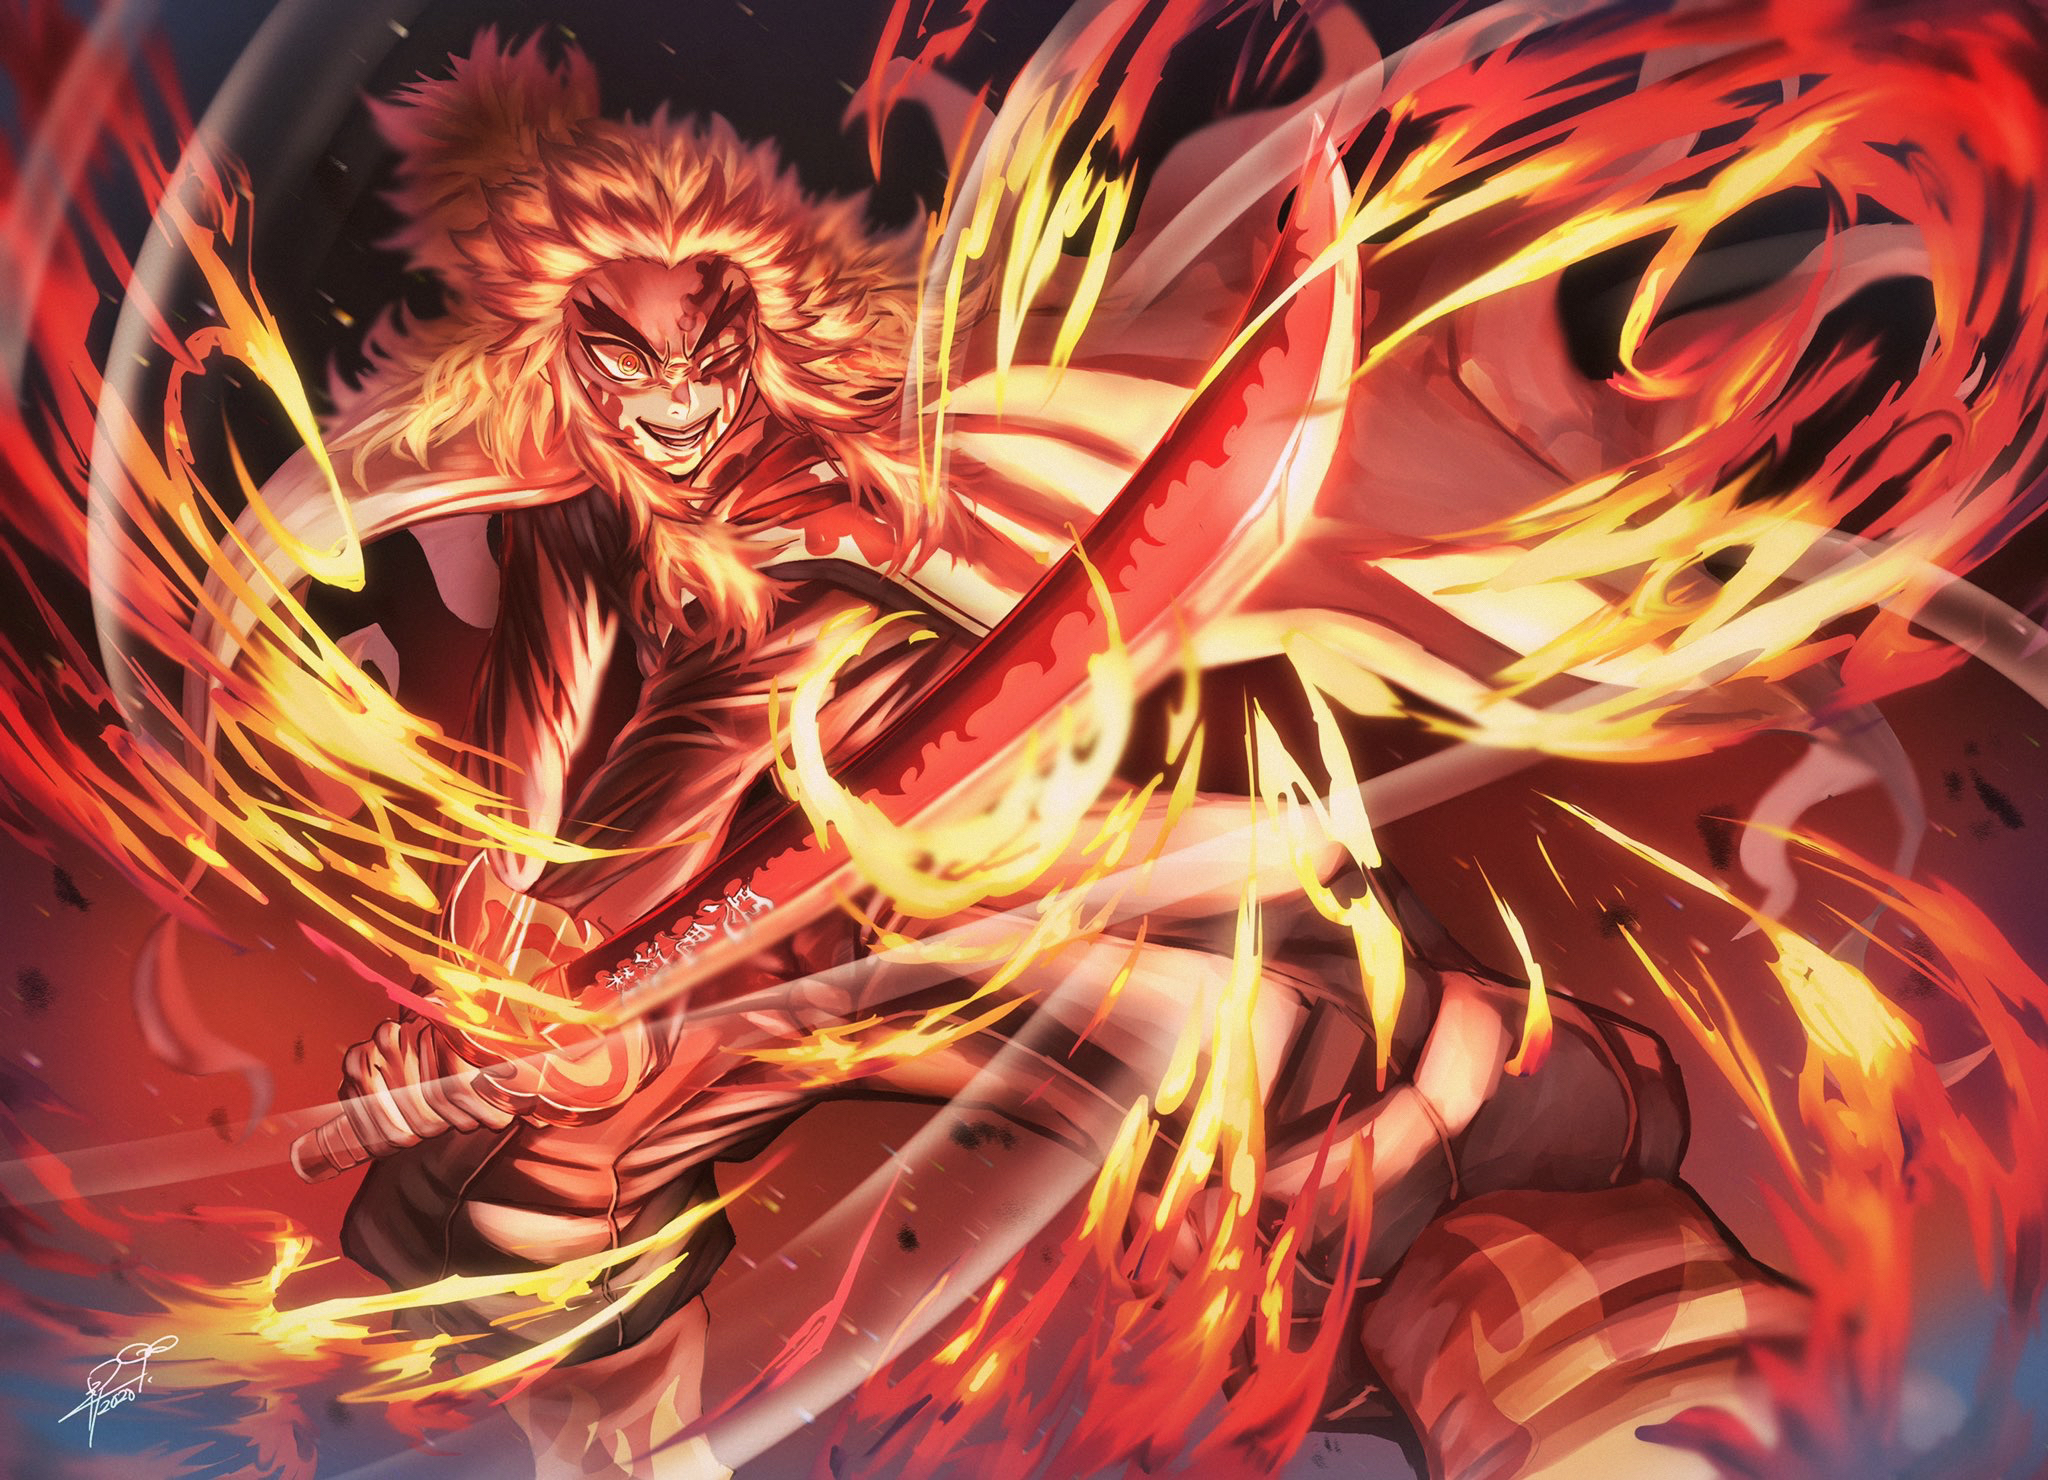 1440x900 Kyojuro Rengoku Dopest 1440x900 Wallpaper Hd Anime 4k Wallpapers Images Photos And Background Wallpapers Den